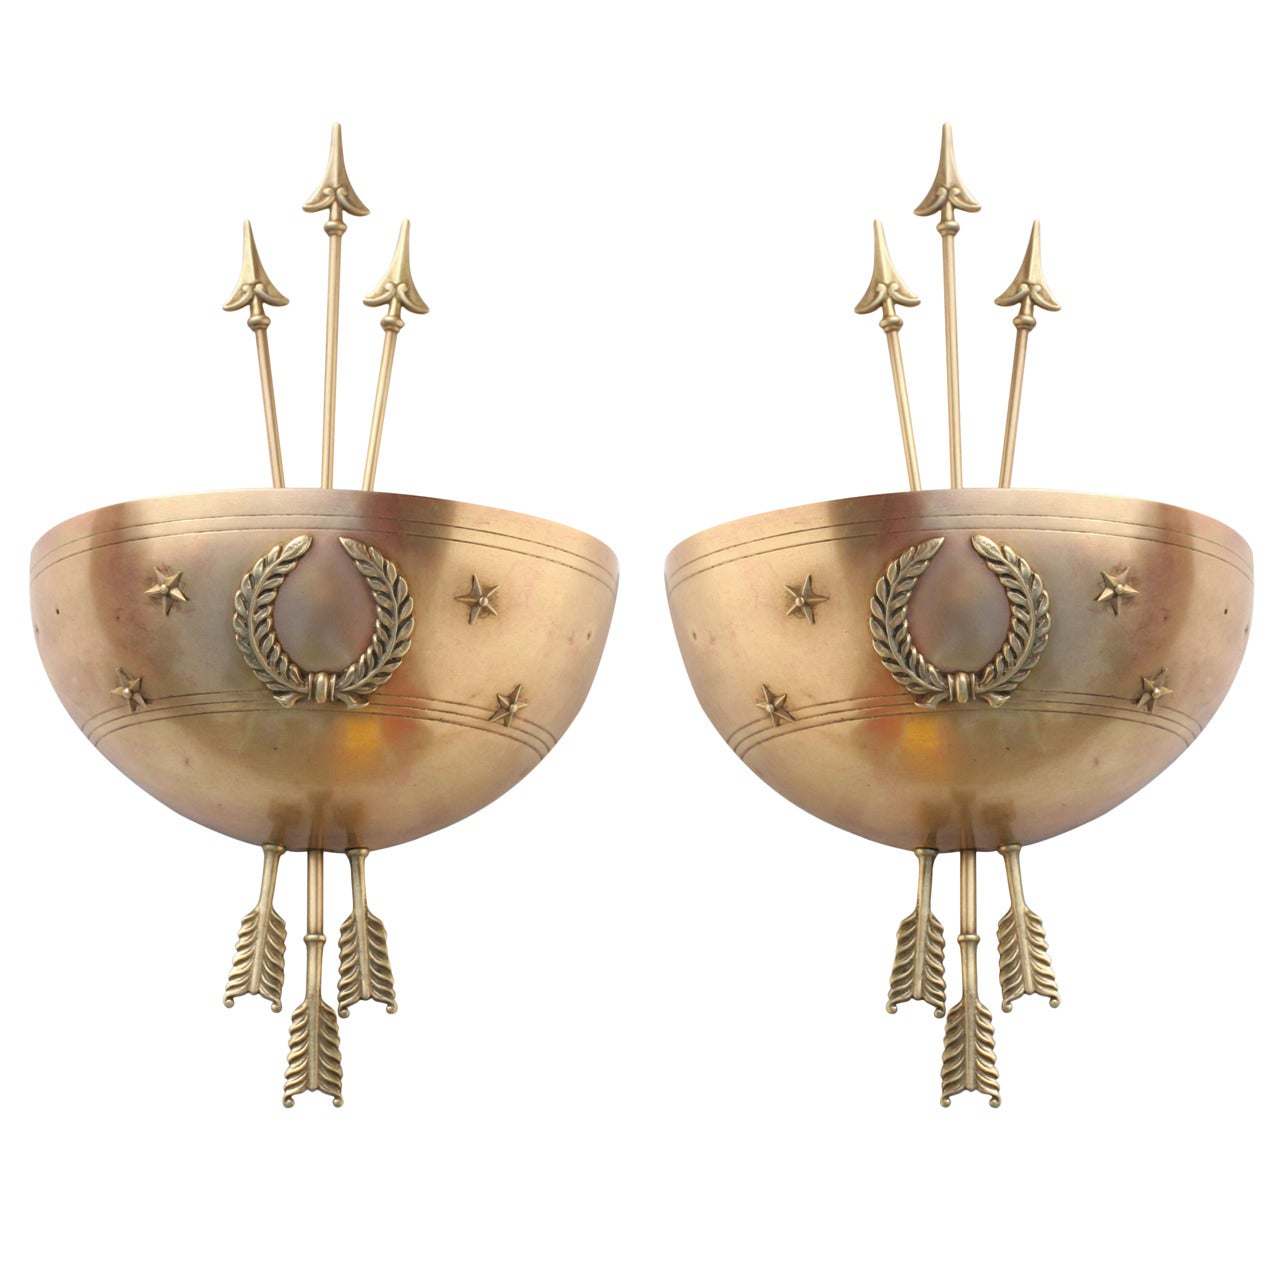 Art Deco Brass Wall Sconces with Star and Arrow Motifs by Levolite, Pair